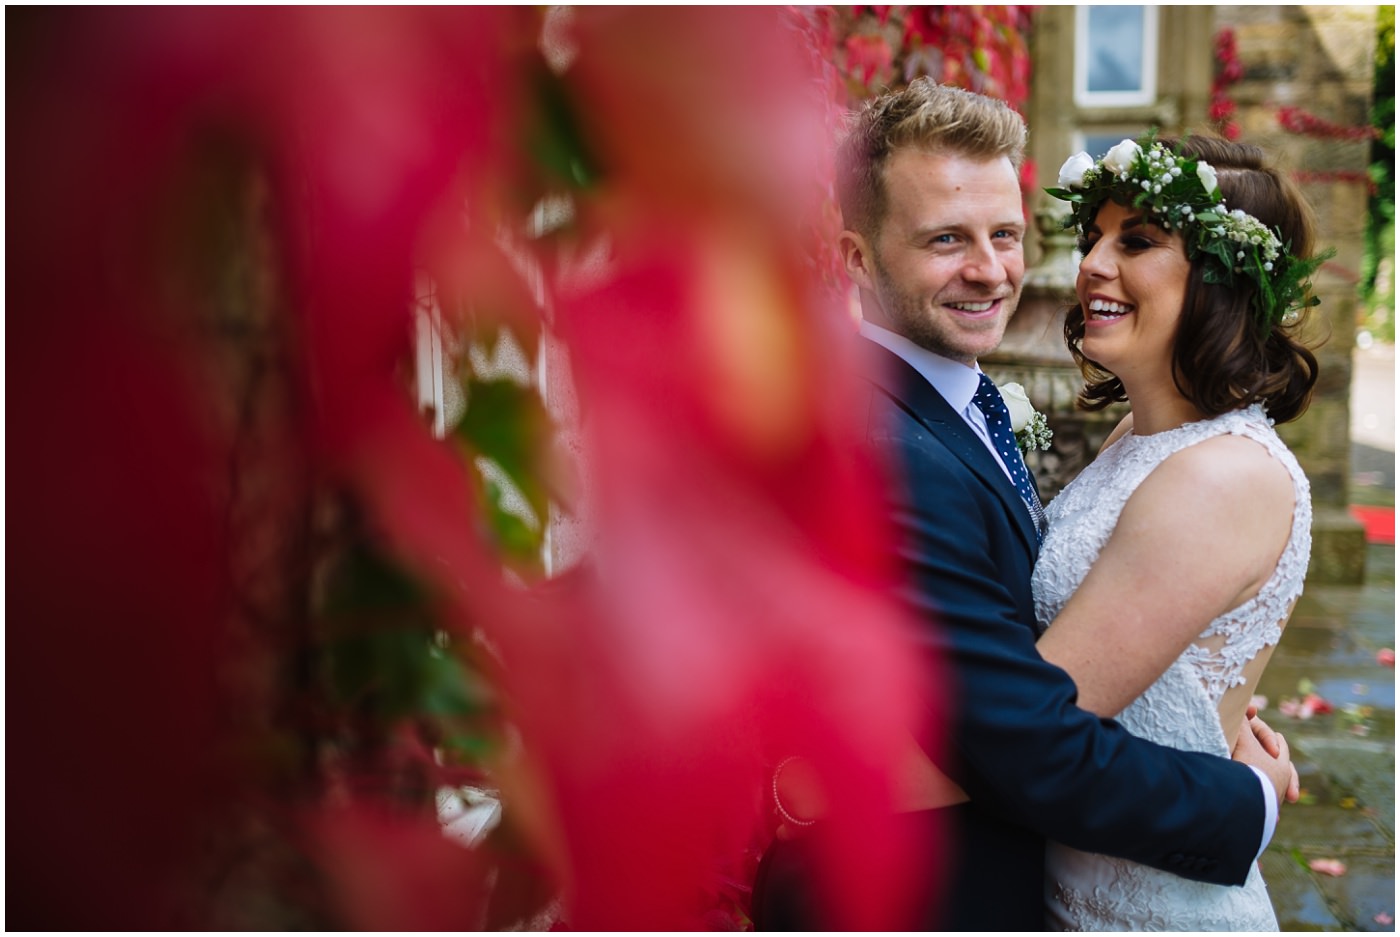 Bride and groom share a moment during portraits at Mitton Hall